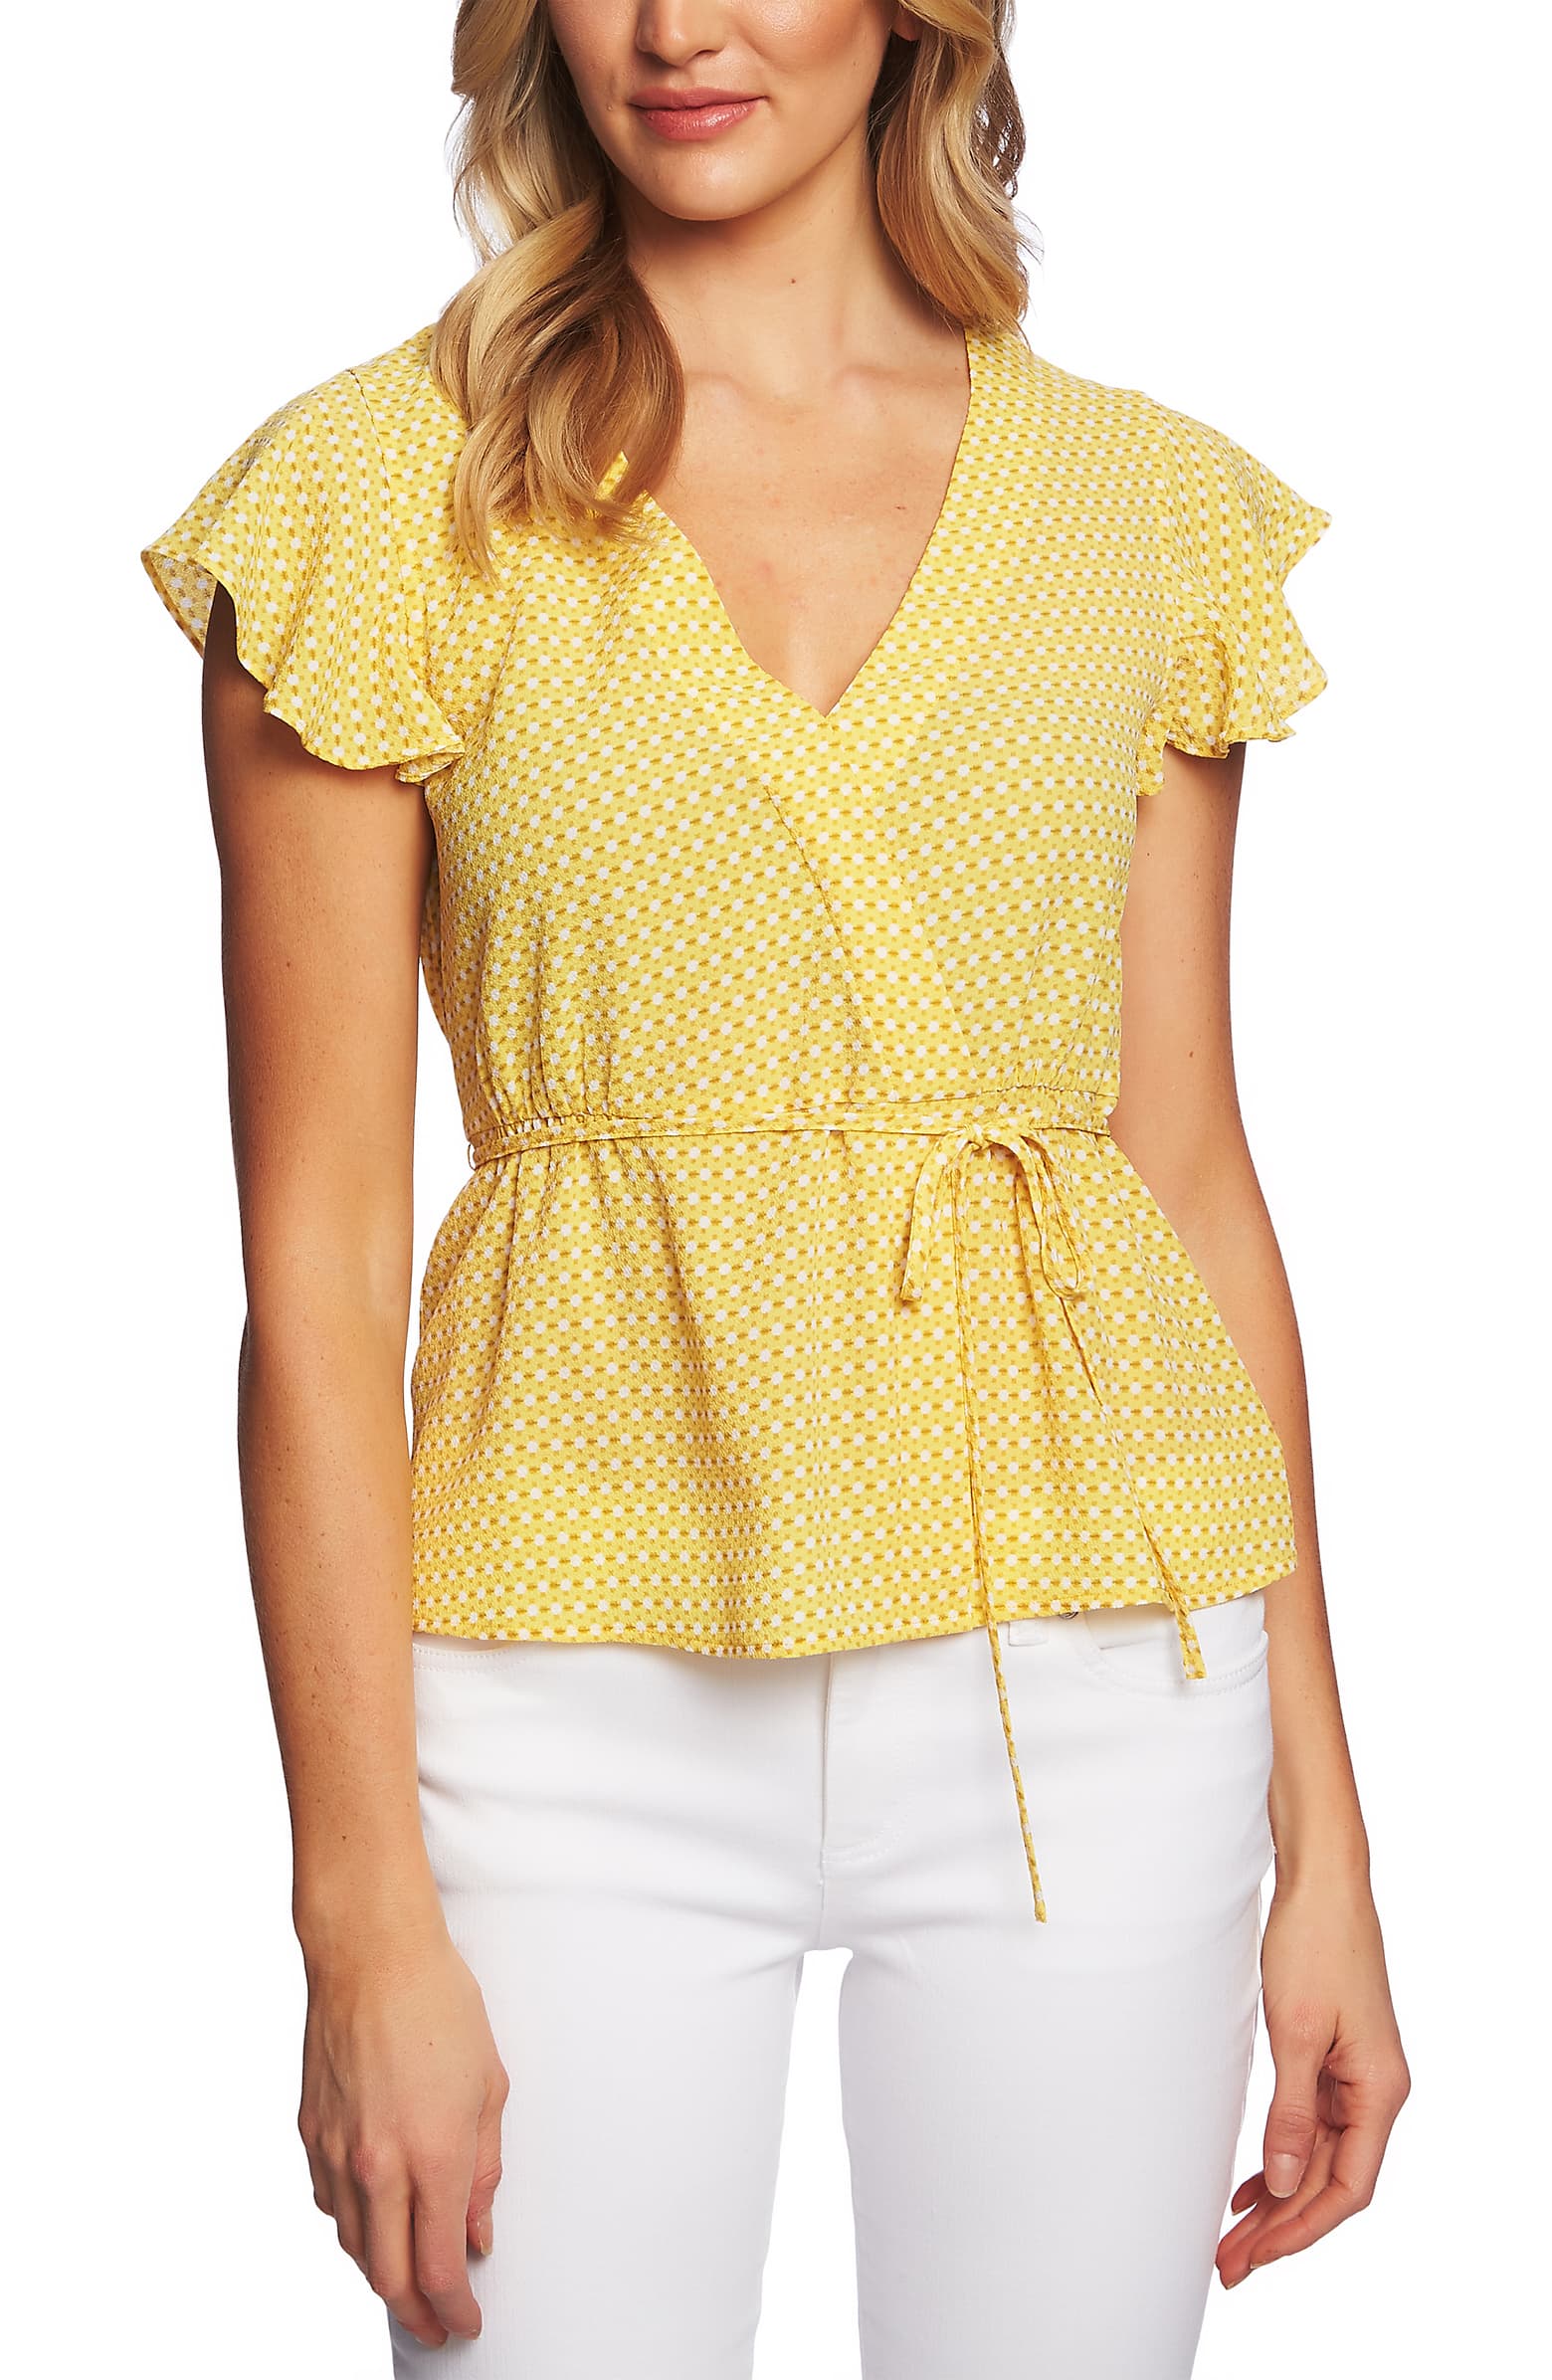 This Flattering Wrap Top Is About To Sell Out At Nordstrom–Order Yours ...